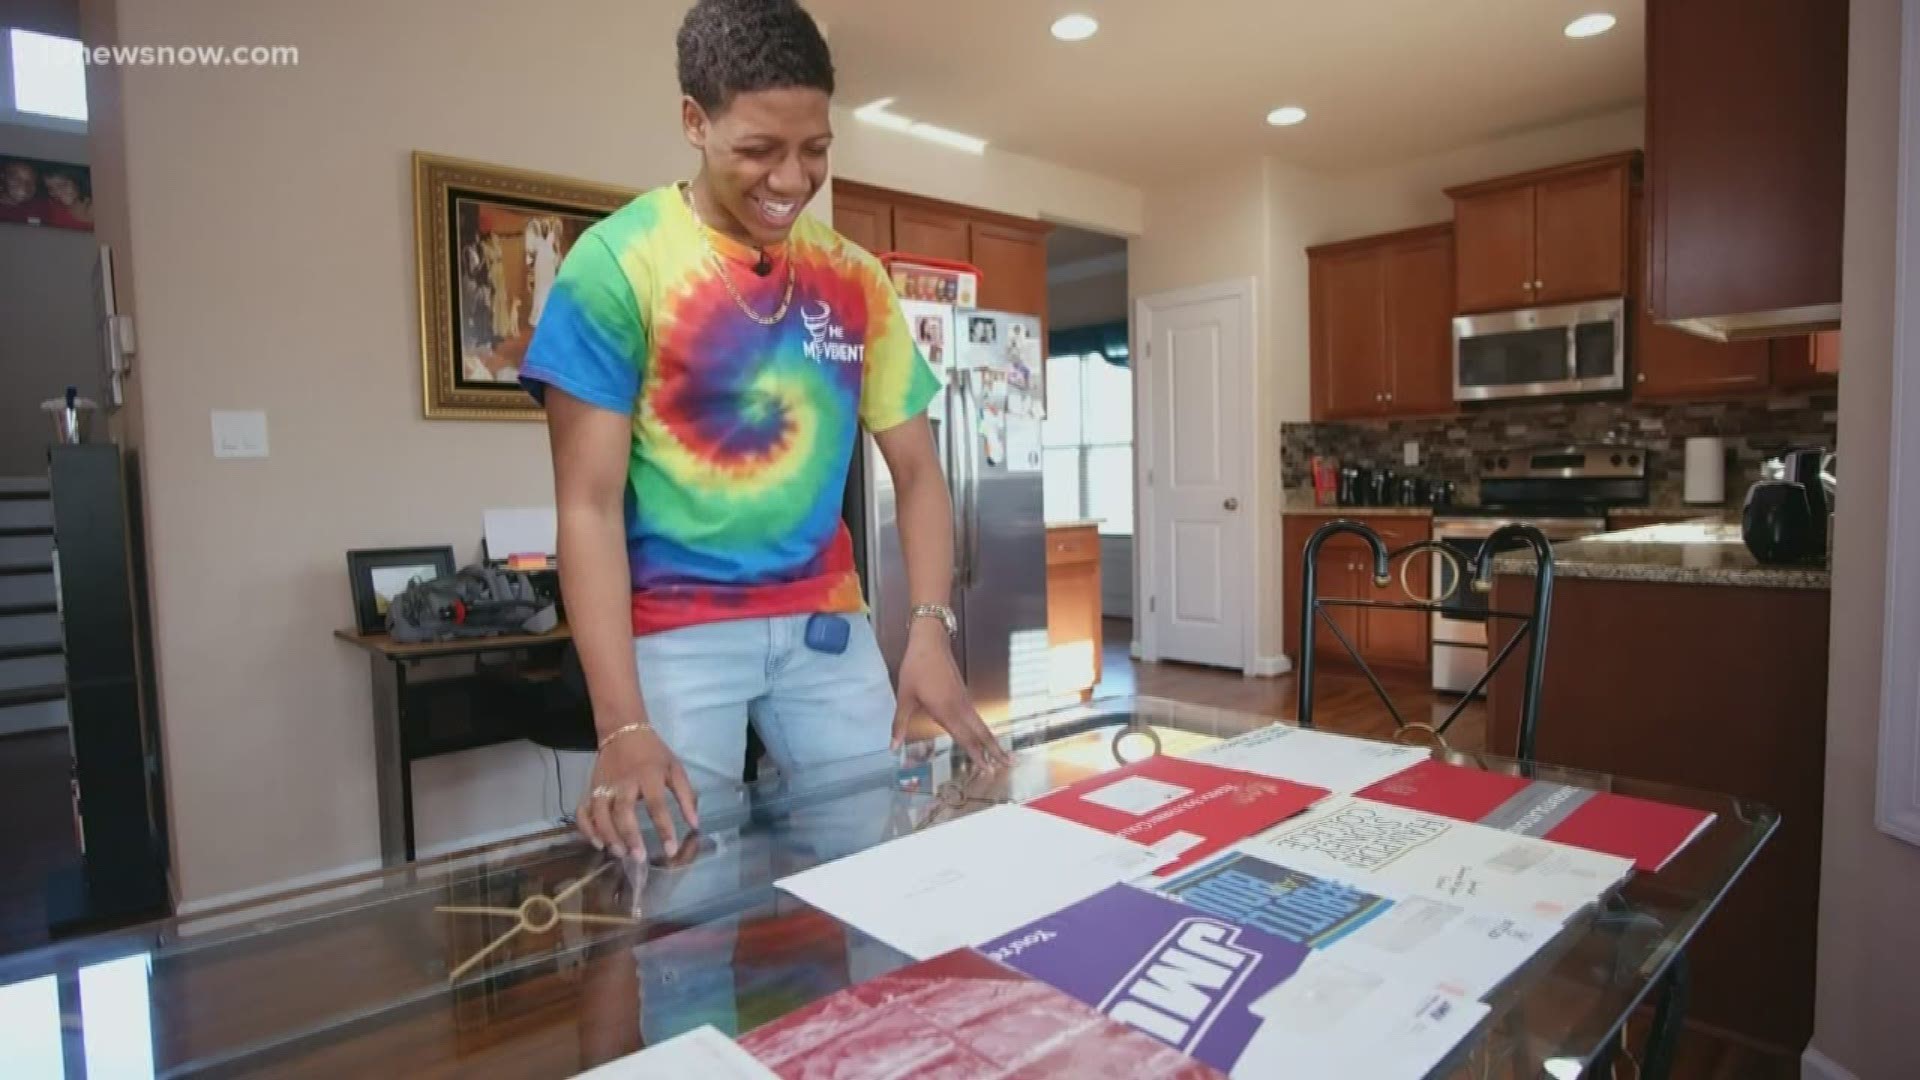 A 17-year-old in Chesapeake has been accepted into 15 universities and over $1 million in scholarship offers.